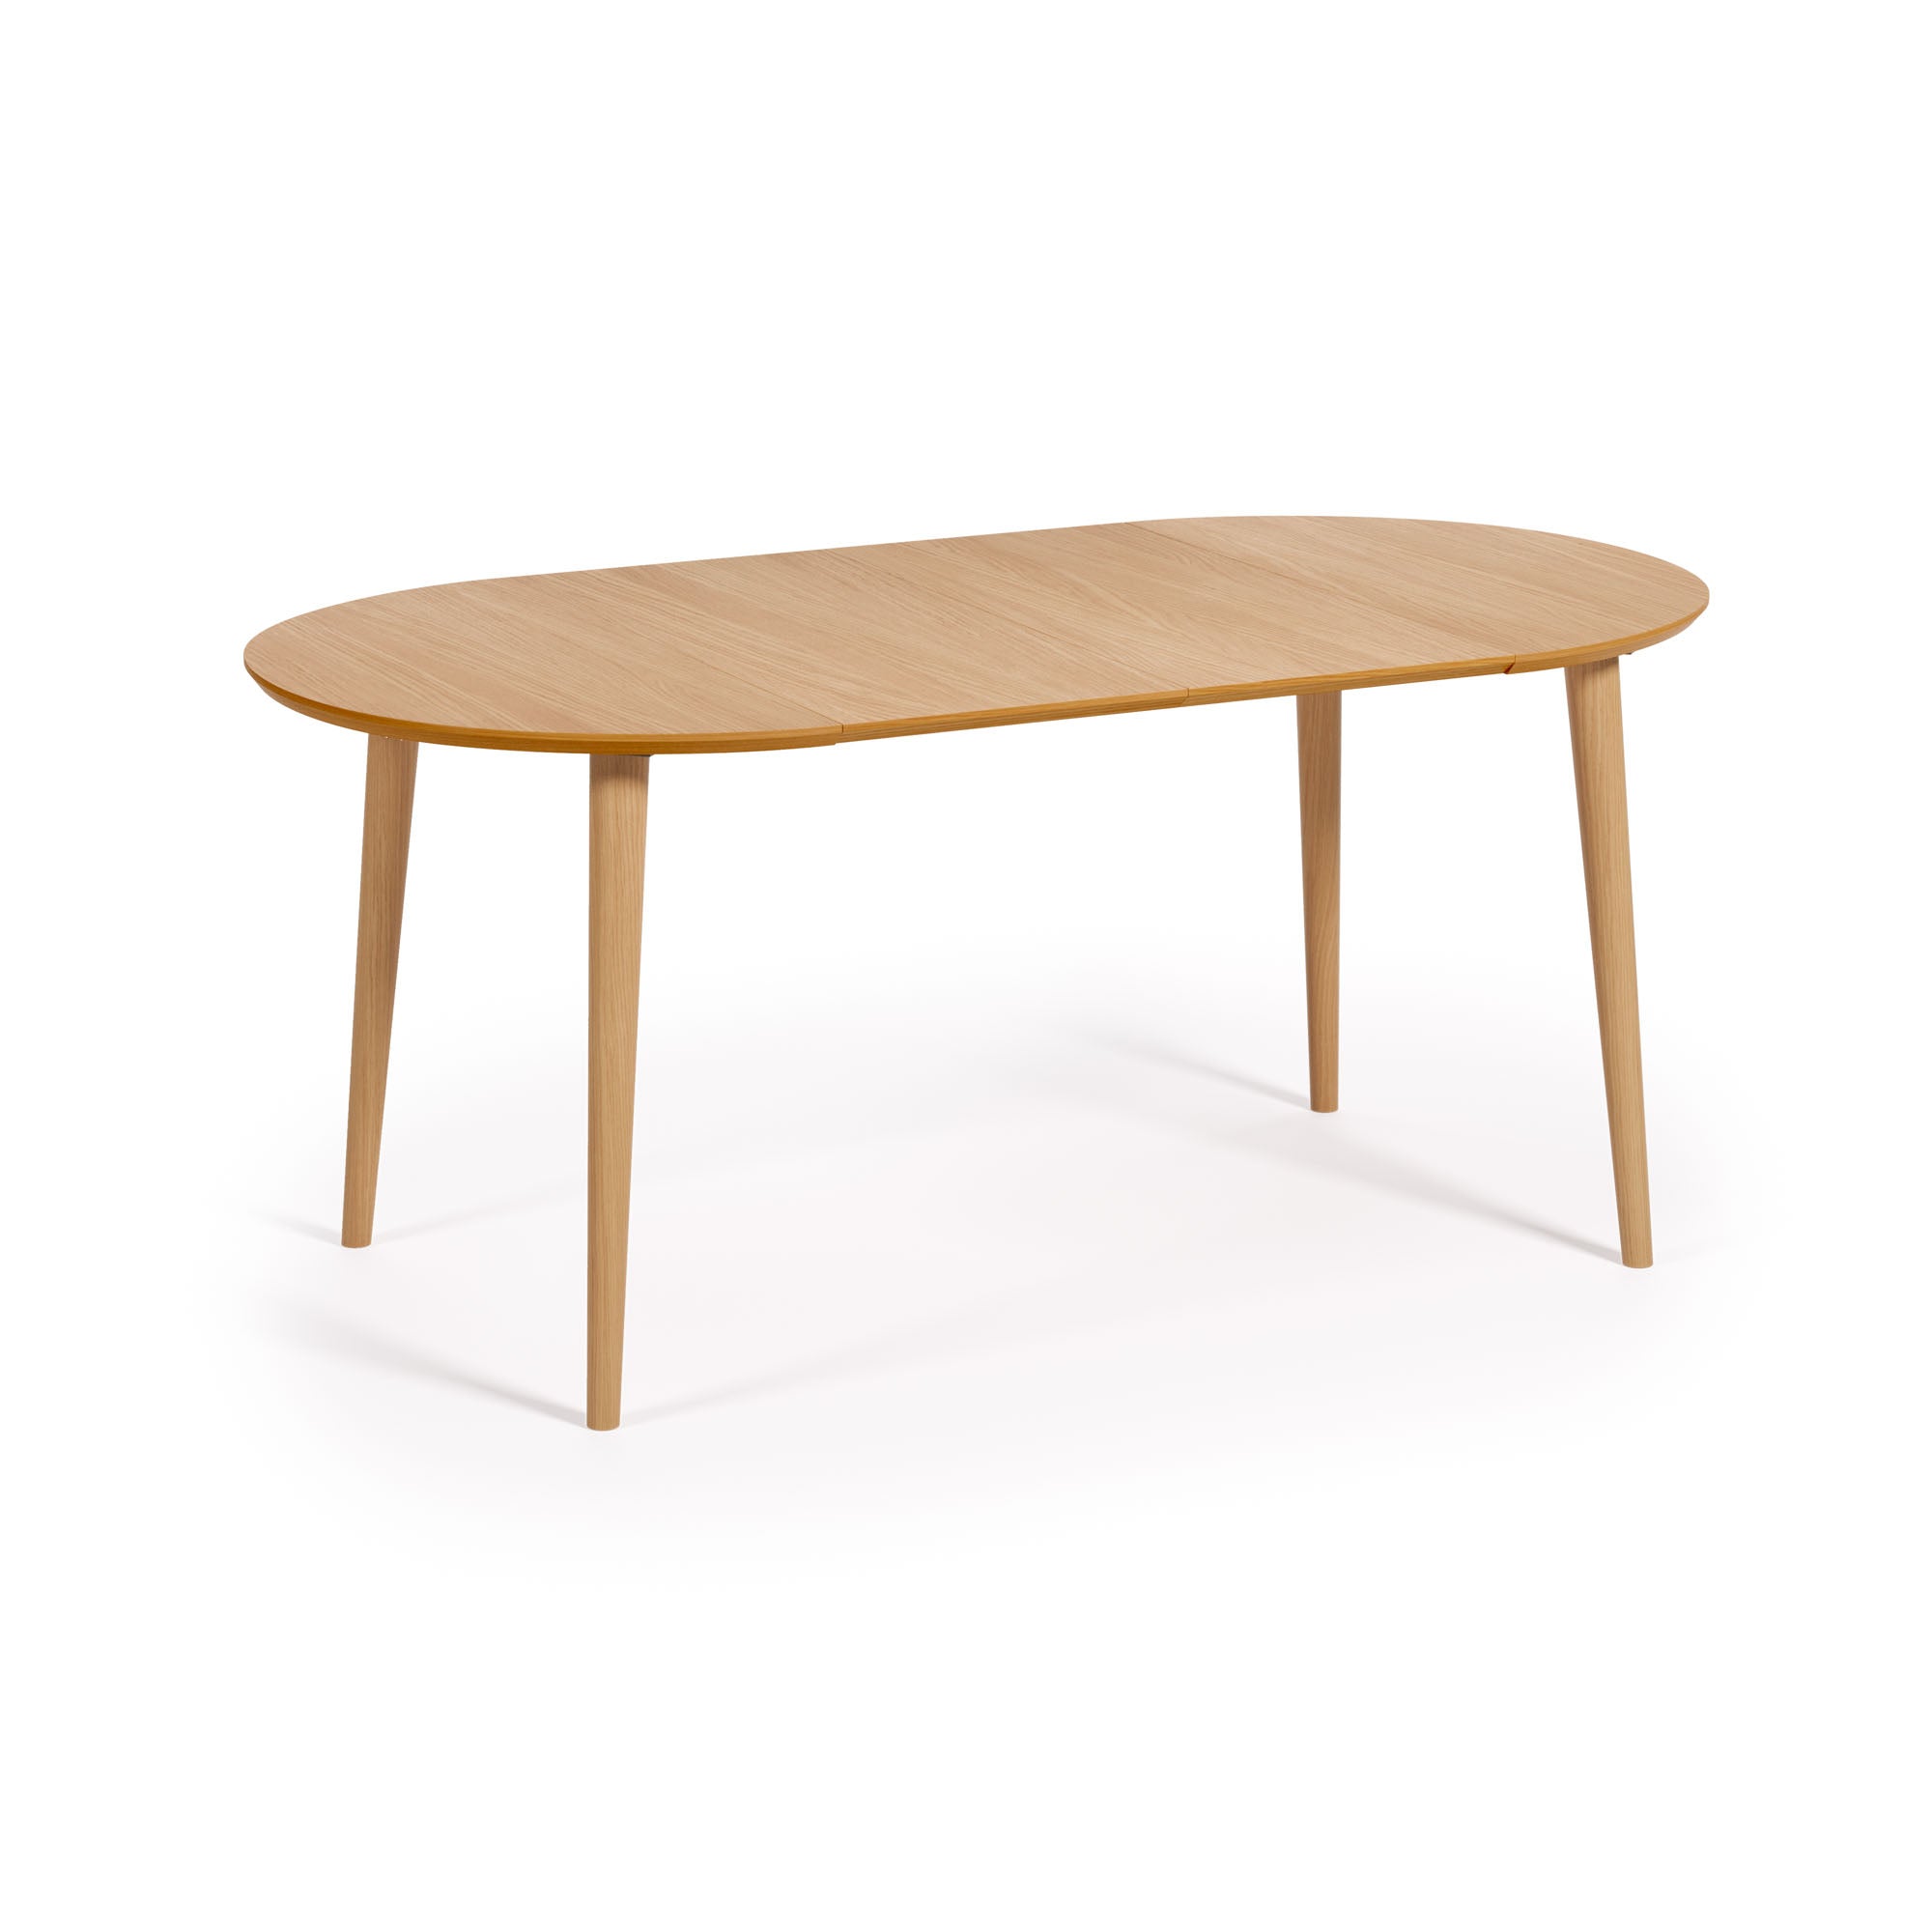 Oqui extendable round table in MDF oak veneer and solid wood legs, 90 (170) x 90 cm